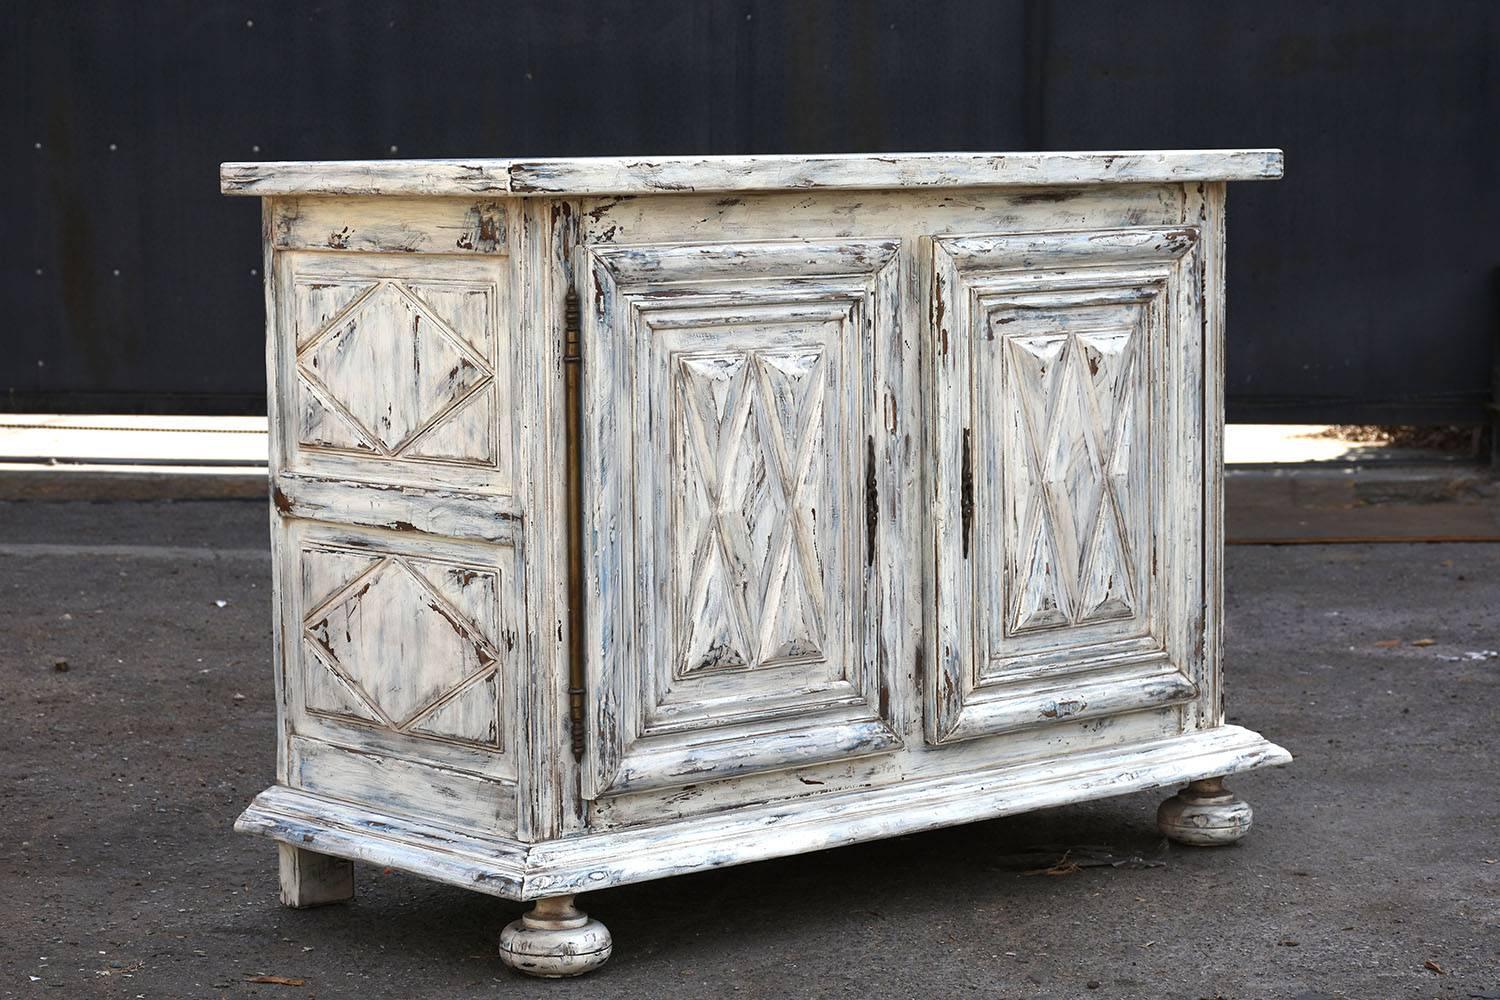 This 1900's French Renaissance-style buffet is made of walnut wood painted in an off-white and blue color combination with a distressed finish. The buffet has a wood top and features carved moulding details throughout. The cabinet doors and the